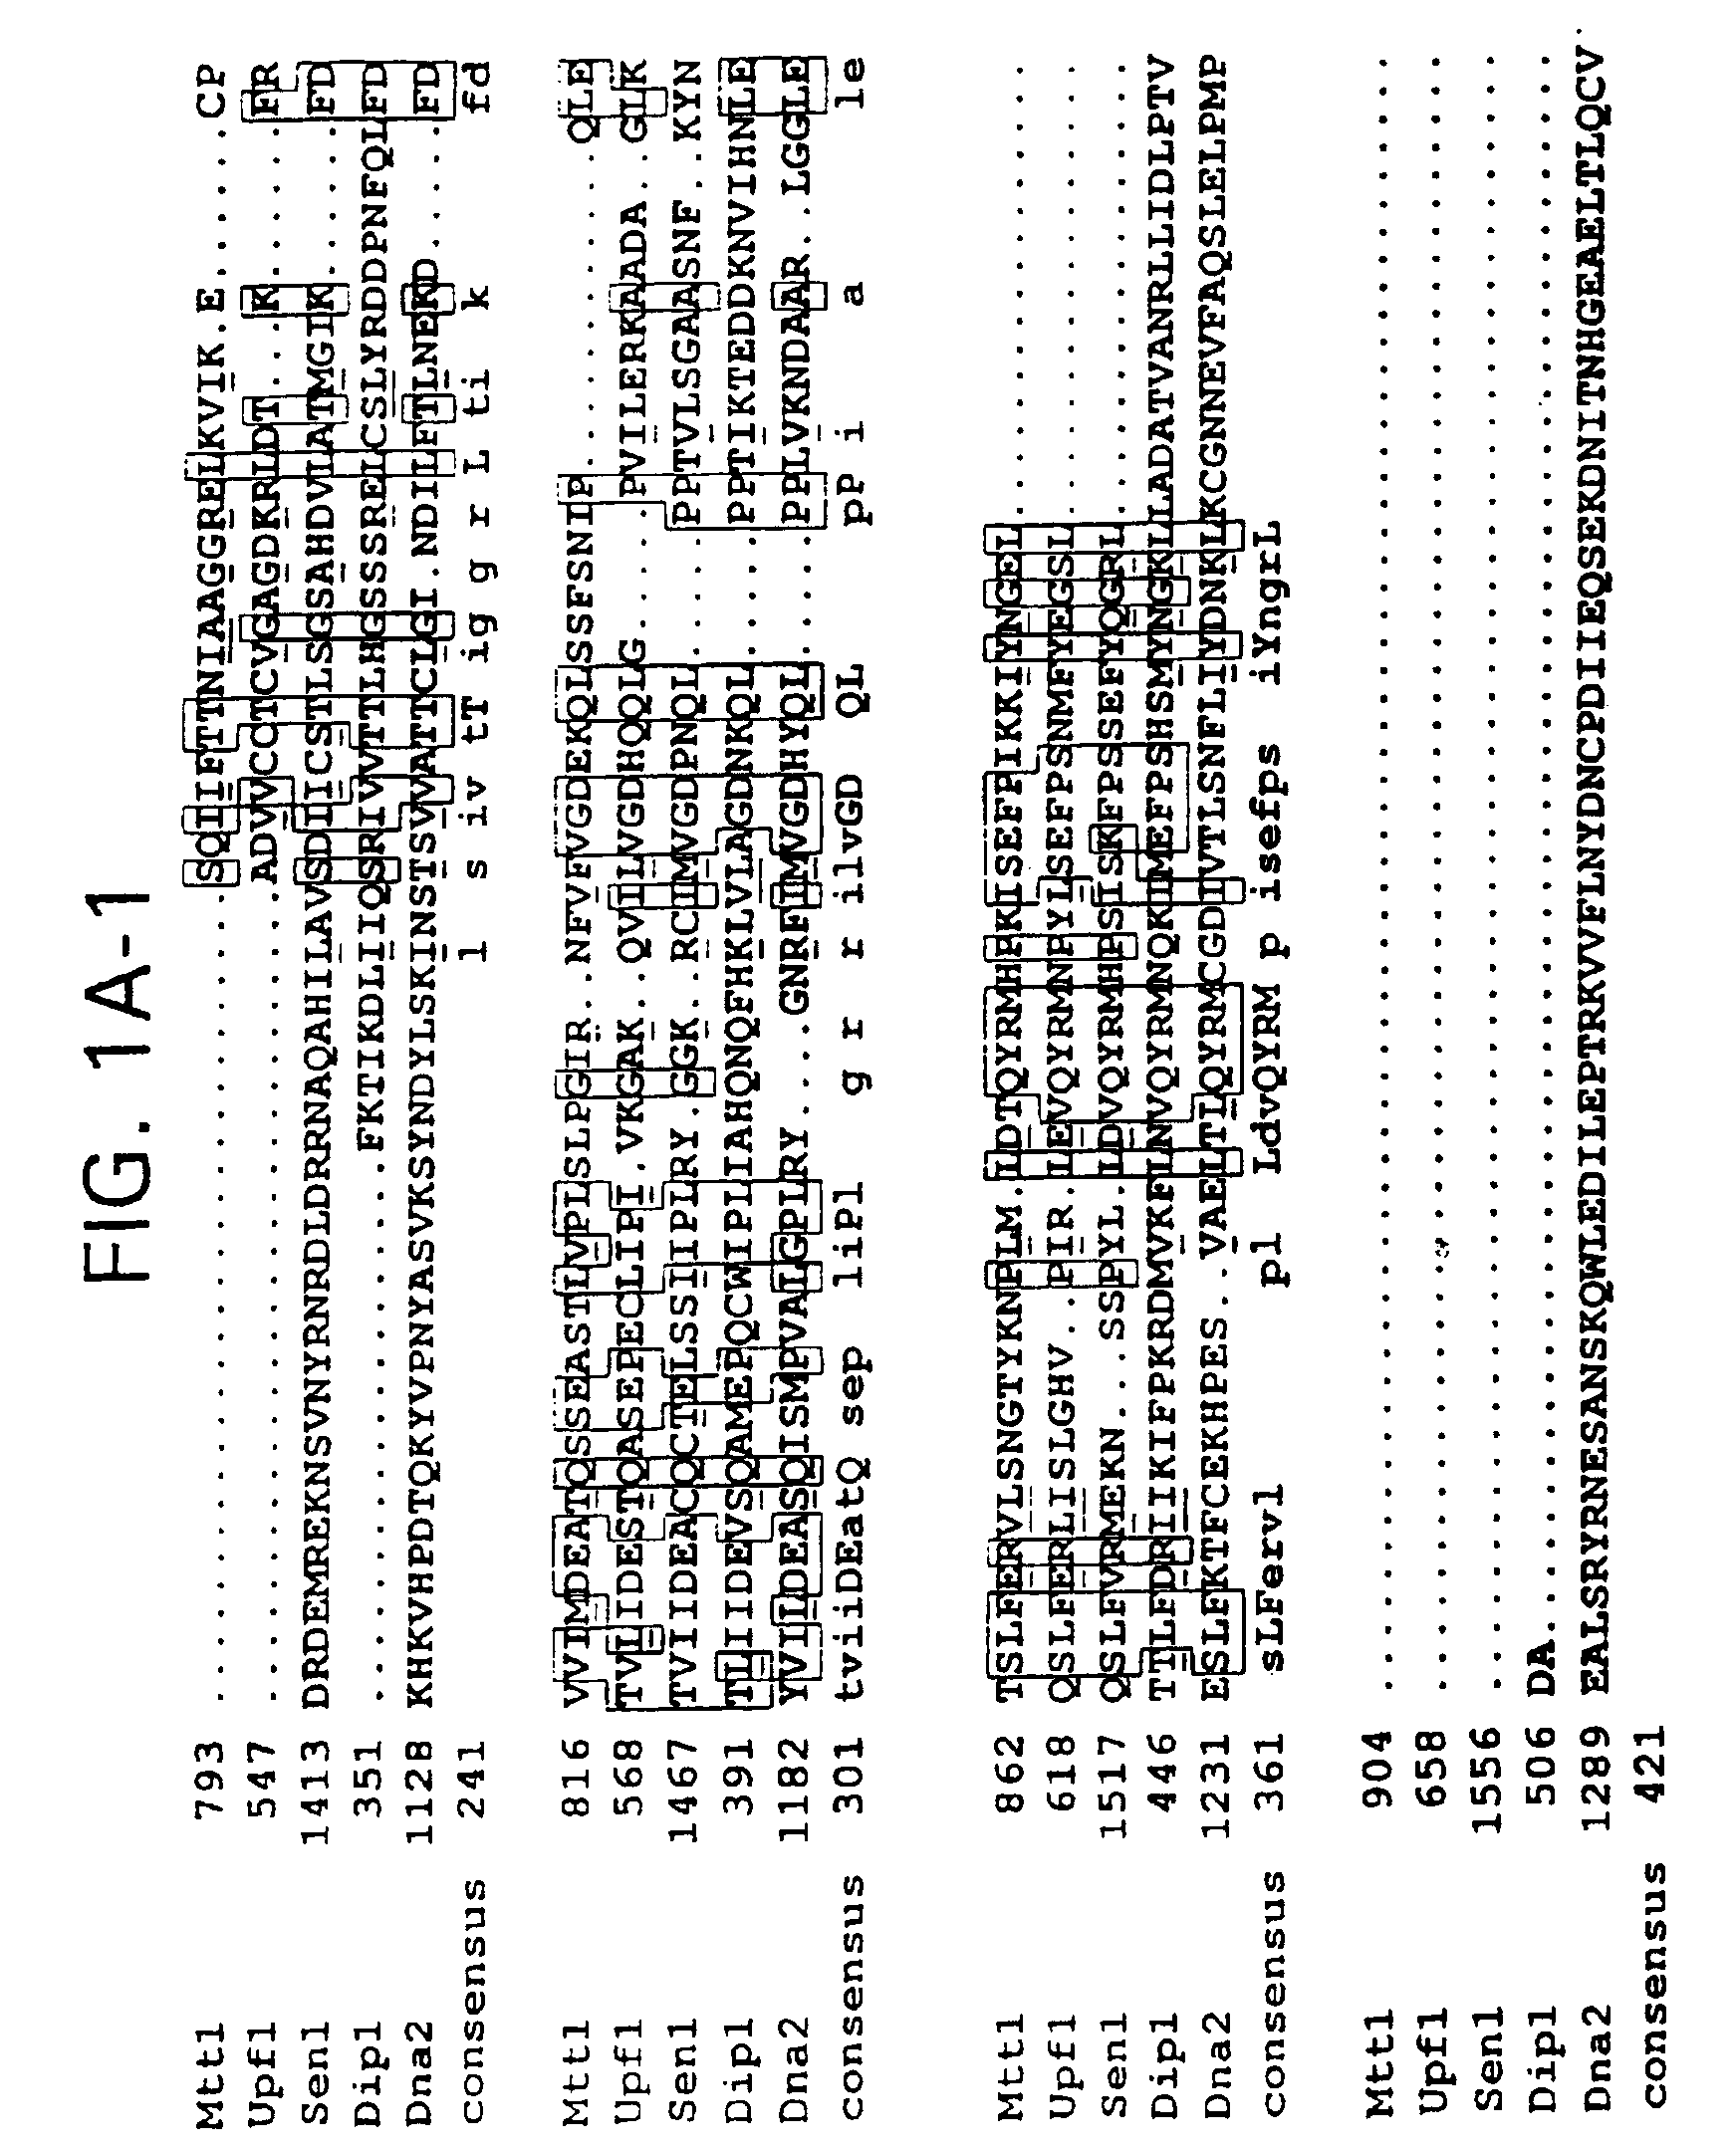 Subfamily of RNA helicases which are modulators of the fidelity of translation termination and uses thereof